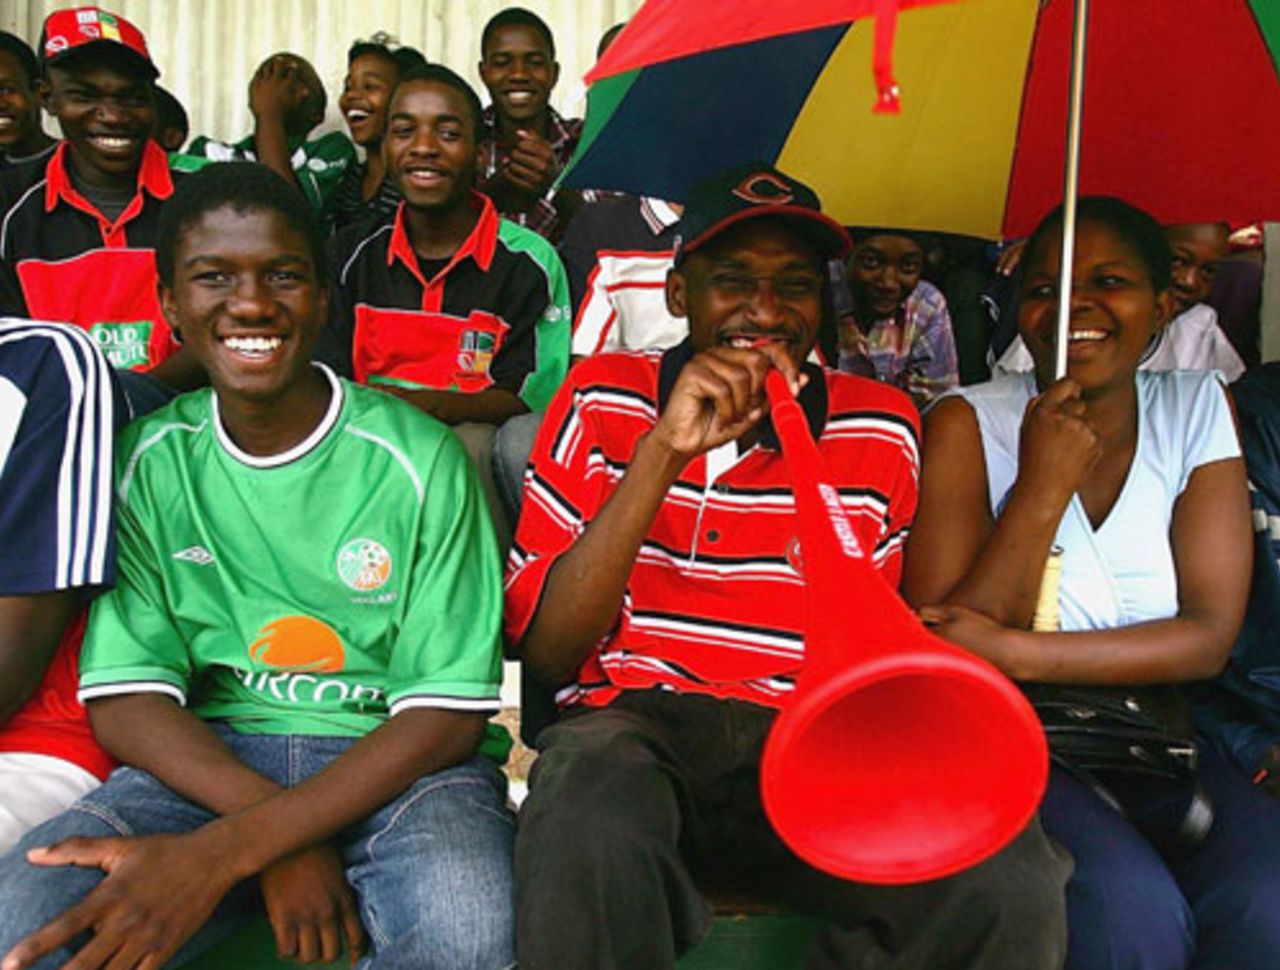 The fans' spirits aren't dampened by a brief downpour, Zimbabwe v England, 3rd ODI, December 2004